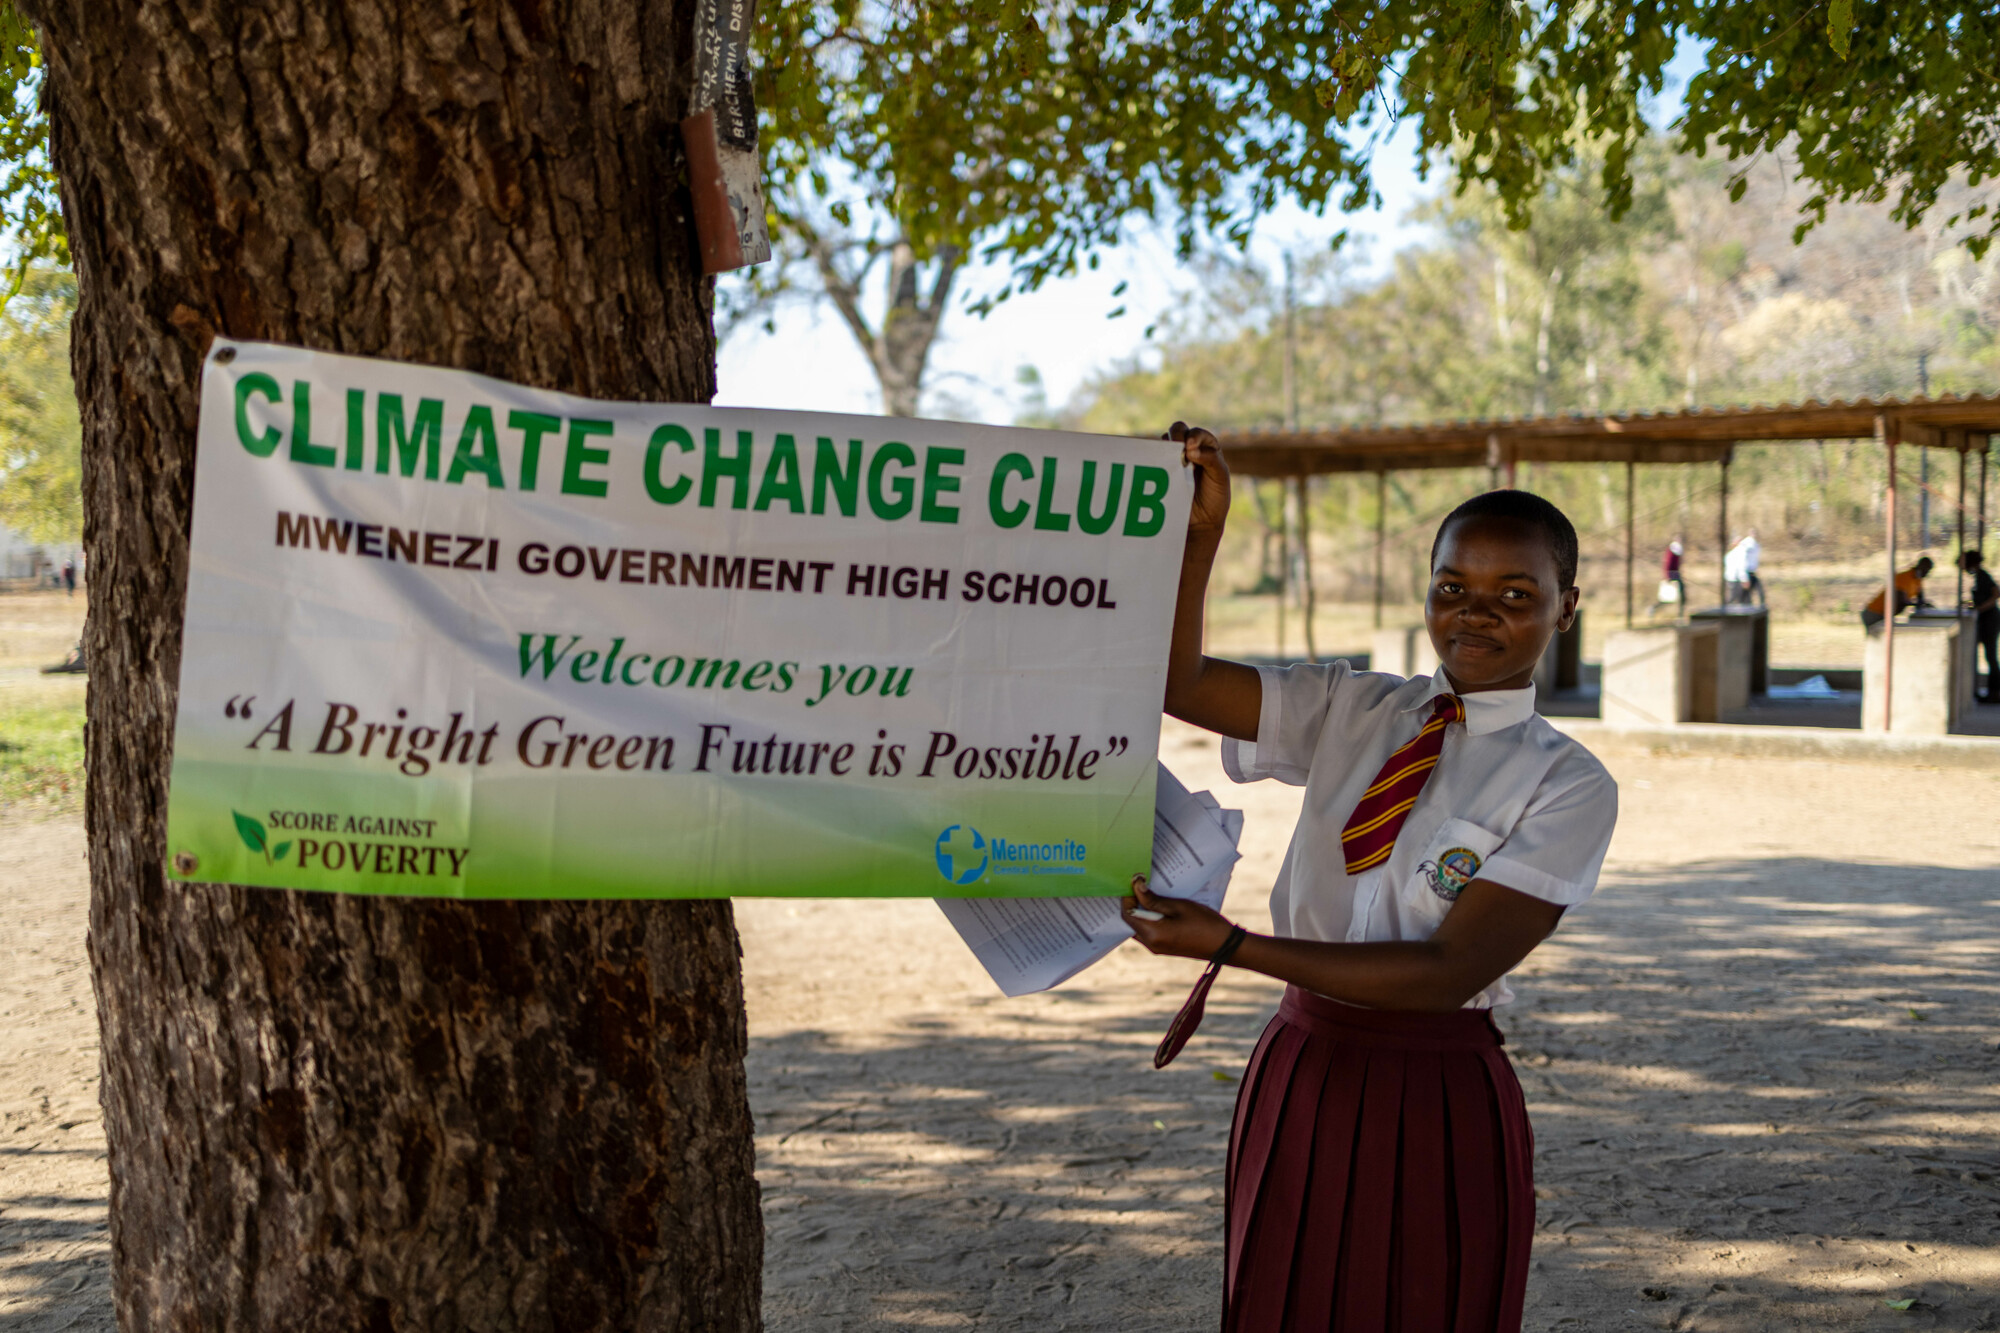 A student in a school uniform holds up one end of a banner. (The other half is attached to a tree trunk). The banner says, "Climate change club. Mwenezi Government High School Welcomes you. 'A Bright Green Future is Possible.'"